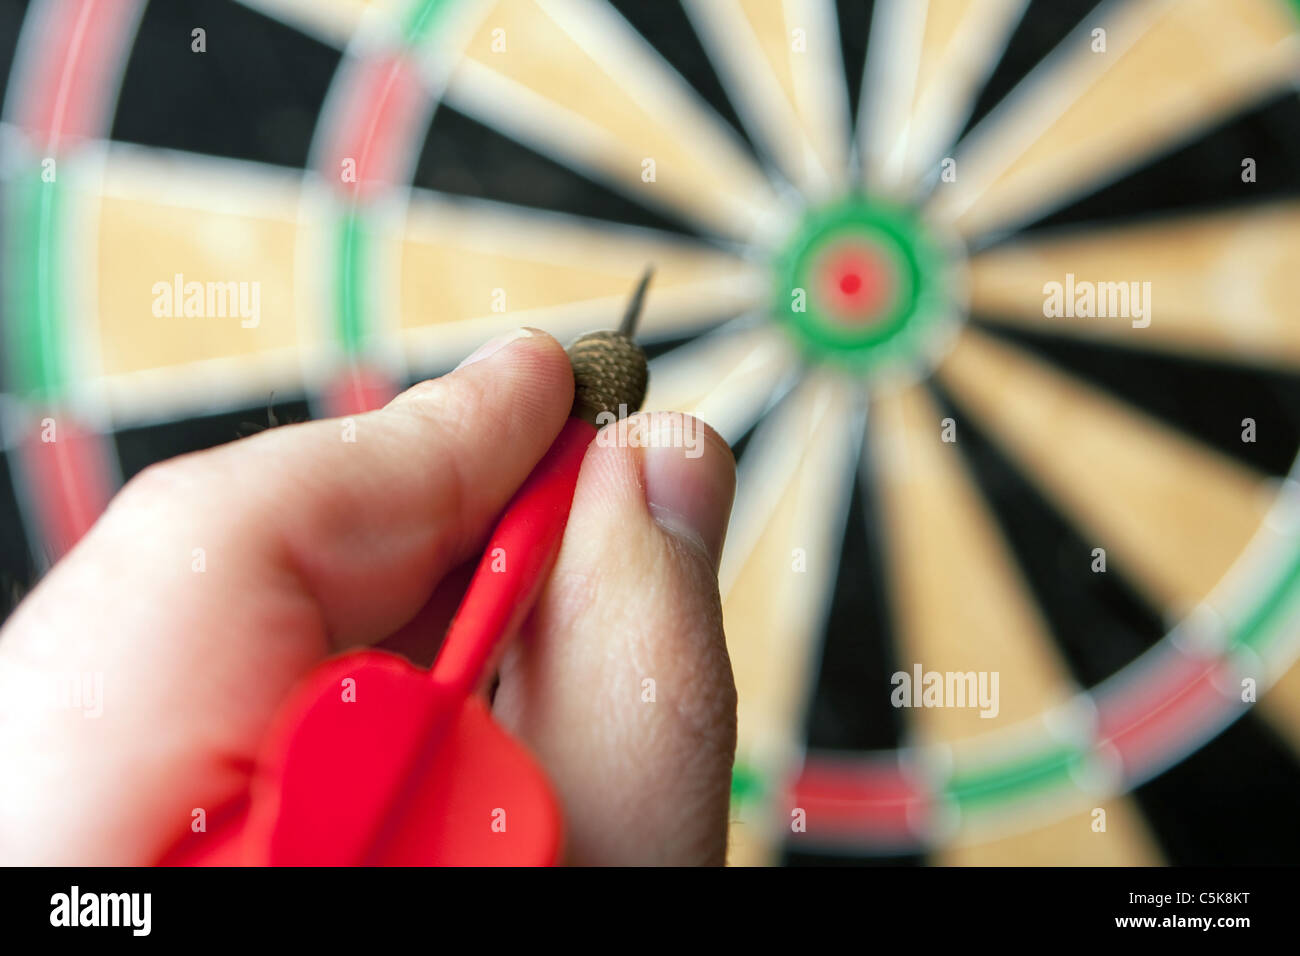 A hand holding a dart getting ready to aim at the dartboard. Shallow depth of field. Stock Photo